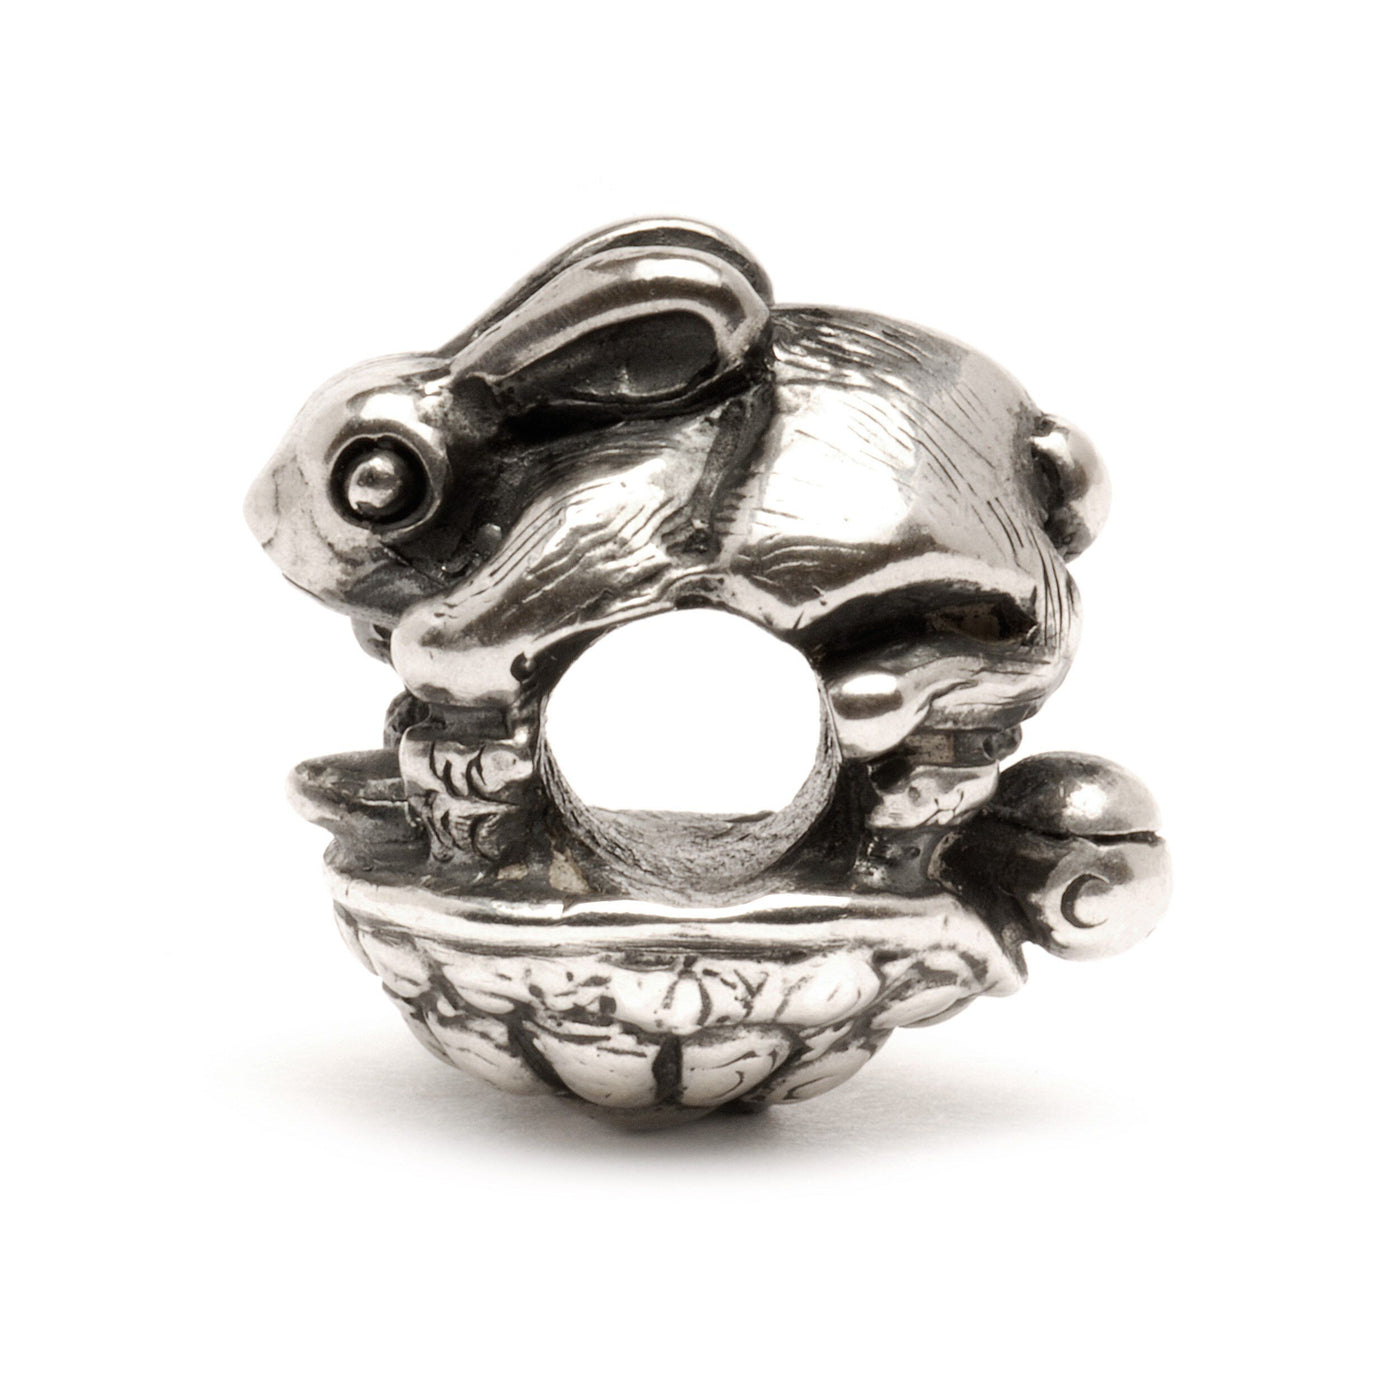 The Hare and the Tortoise - Trollbeads Canada